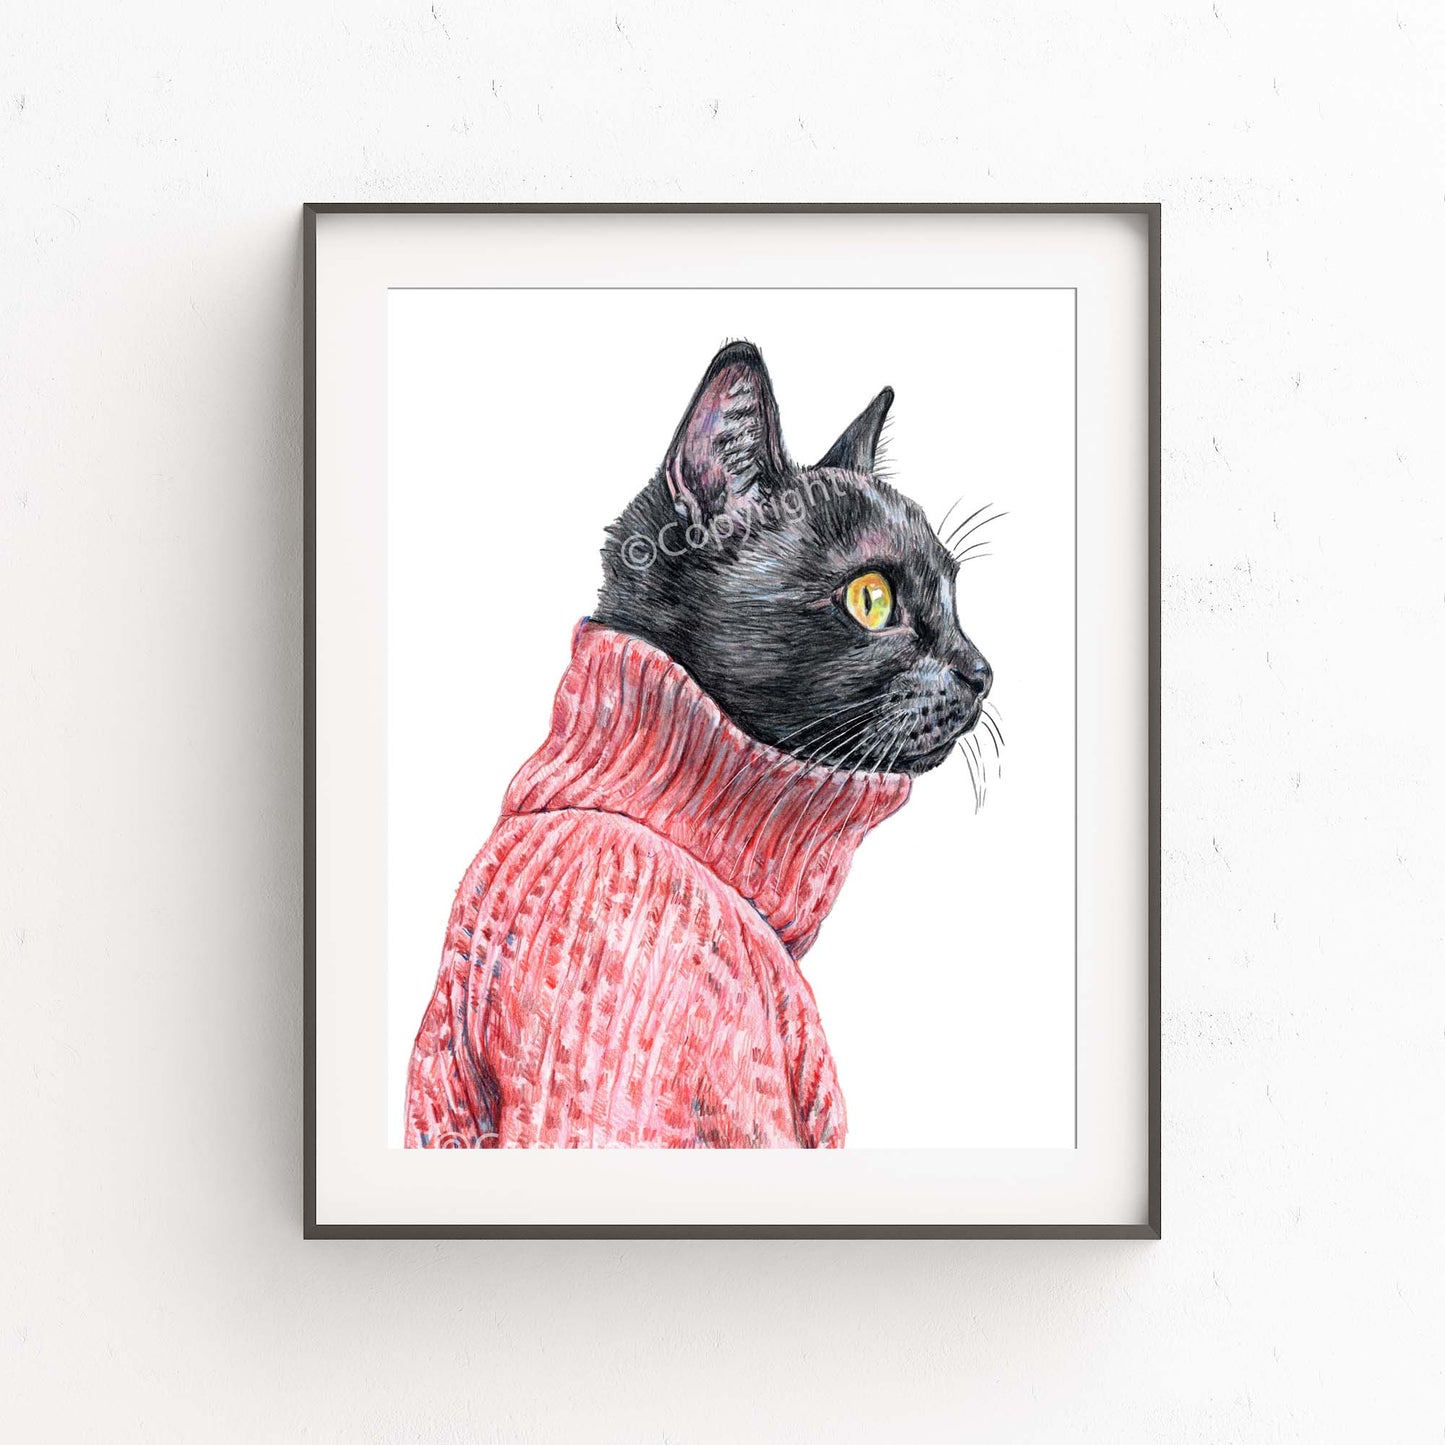 Coloured pencil drawing of a black cat in profile wearing a red turtleneck sweater. Art by Deidre Wicks